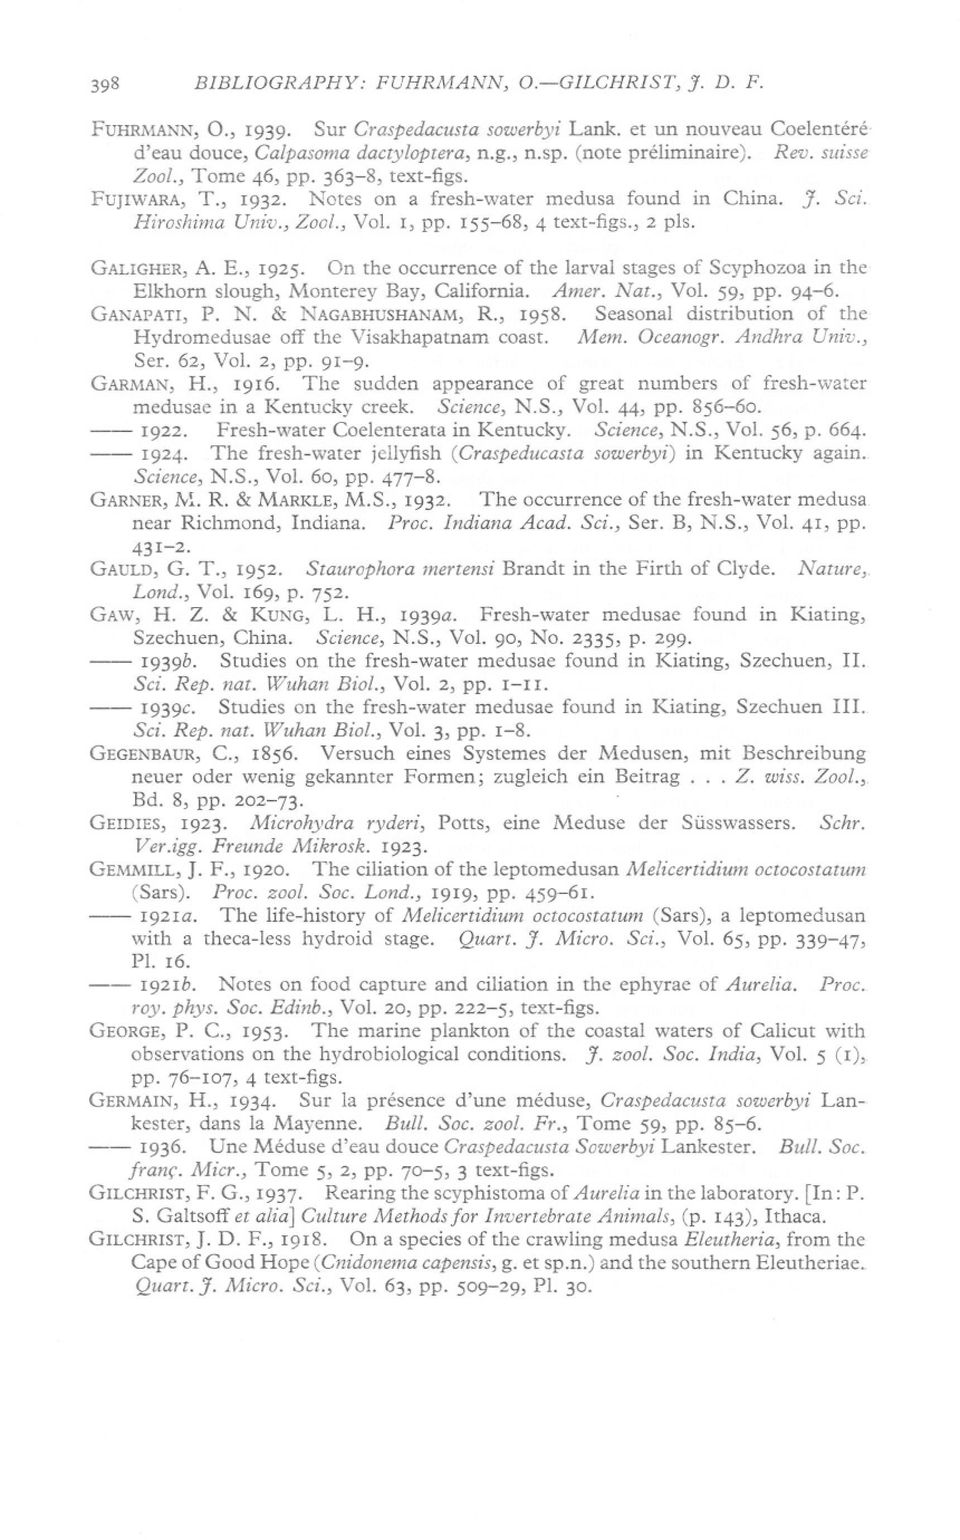 E., 1925. On the occurrence of the larval stages of Scyphozoa in the Elkhorn slough, Monterey Bay, California. Amer. Nat., Vol. 59, pp. 94-6. GANAPATI,P. N. & NAGABHUSHANAM, R., 1958.